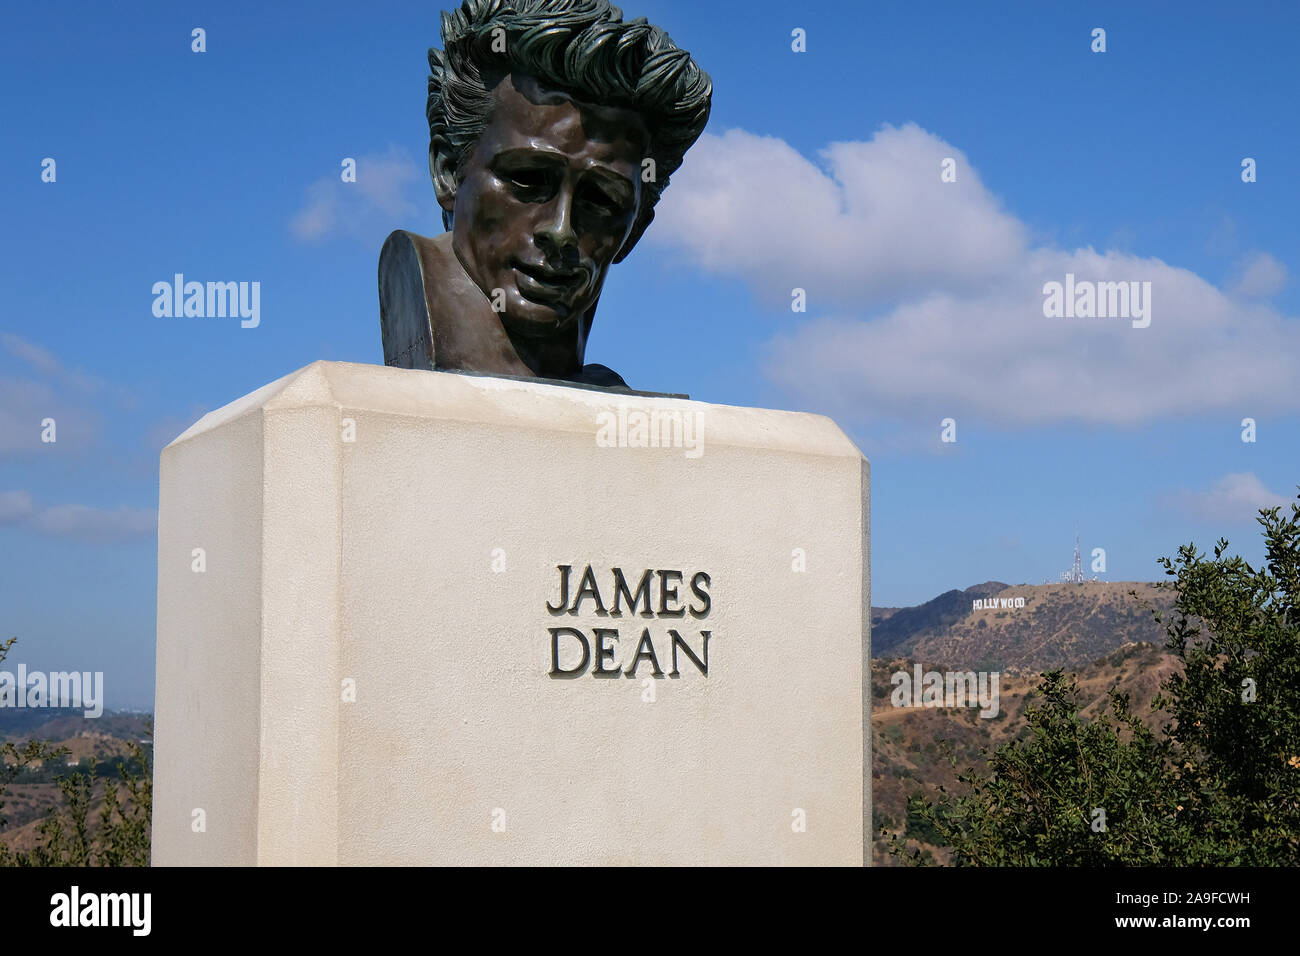 James Dean Memorial on the grounds of Griffith Park Observatory, Los Angeles, California, USA Stock Photo